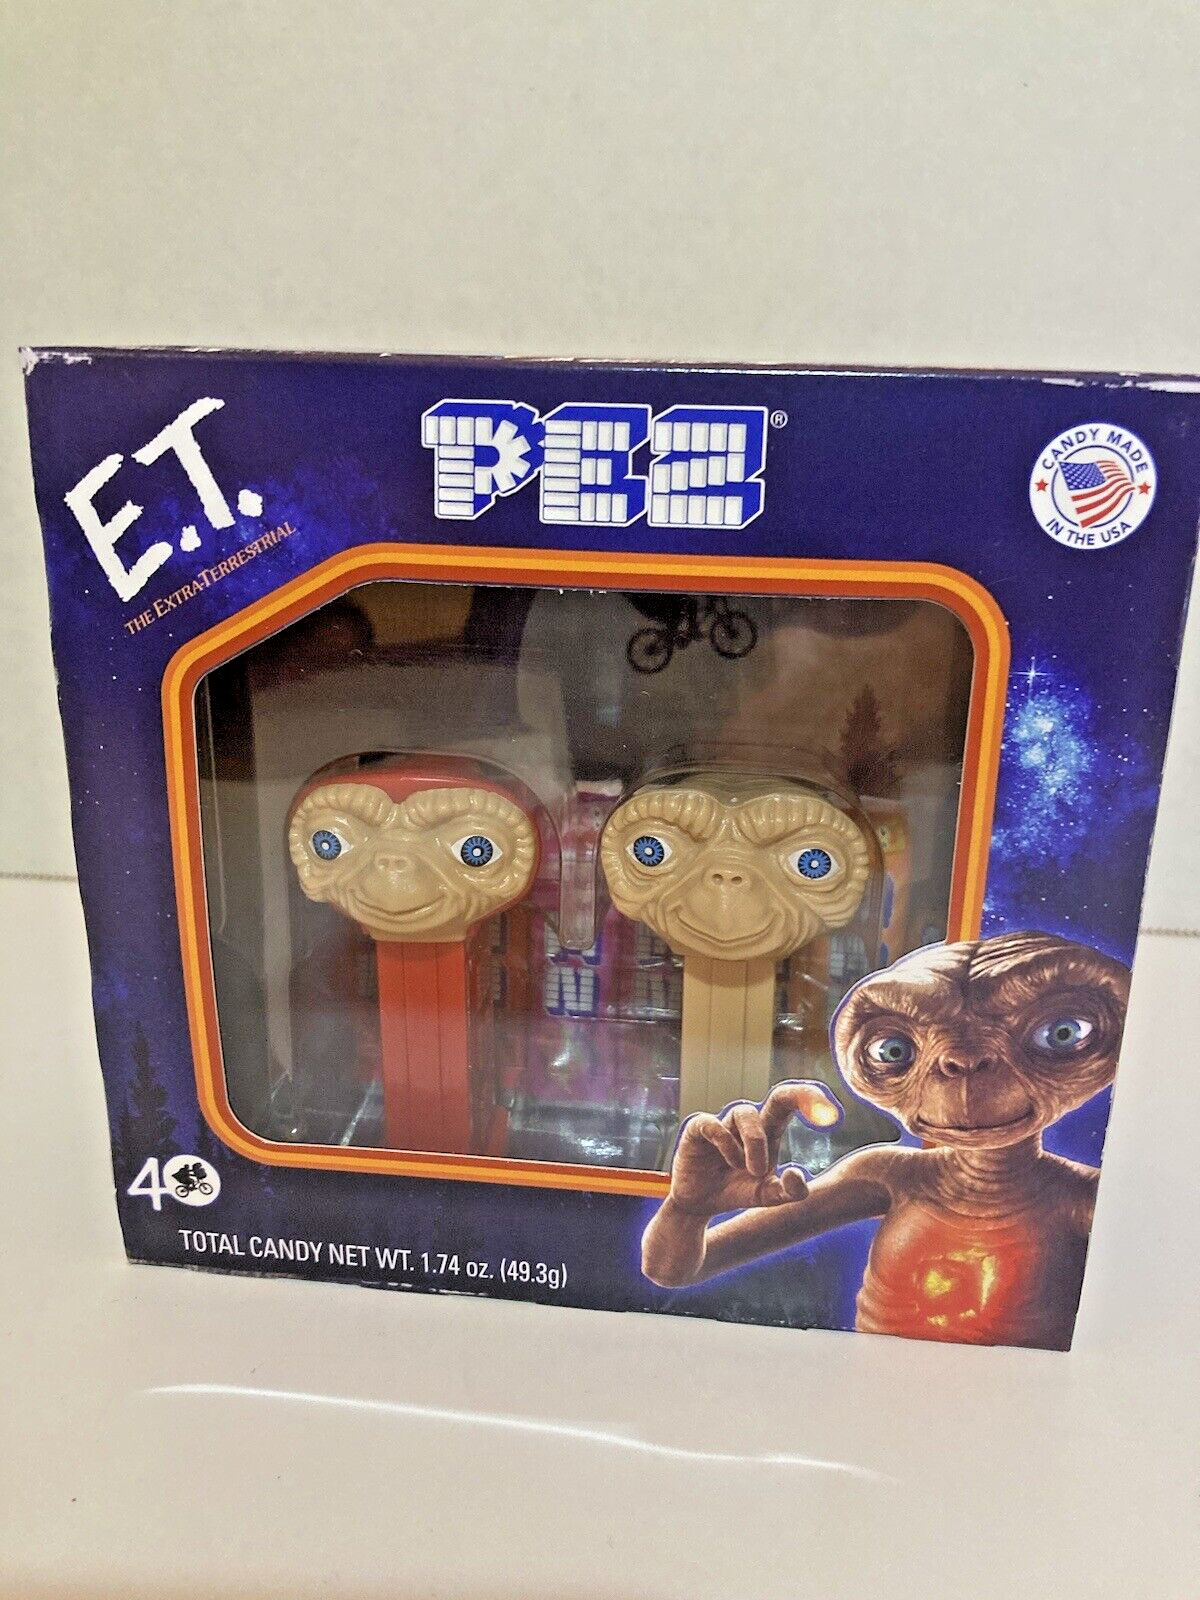 PEZ Candy Dispenser E.T. 40th Anniversary Set -Extraterrestrial - New in box